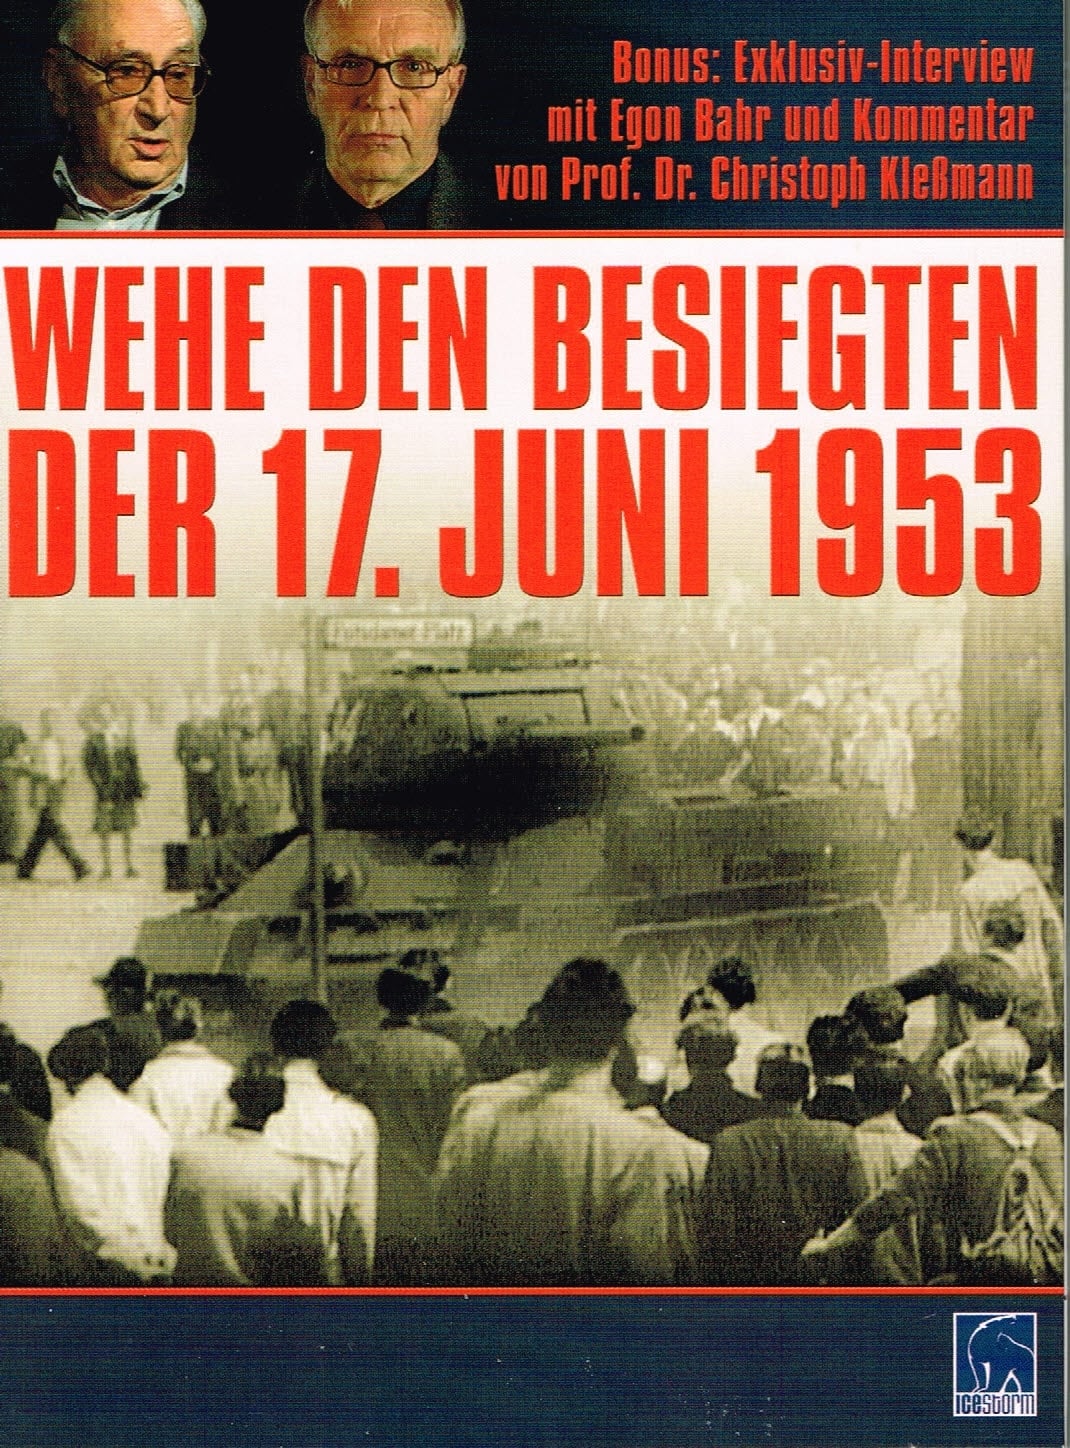 Woe to the Vanquished – The Workers’ Uprising, 17 June 1953